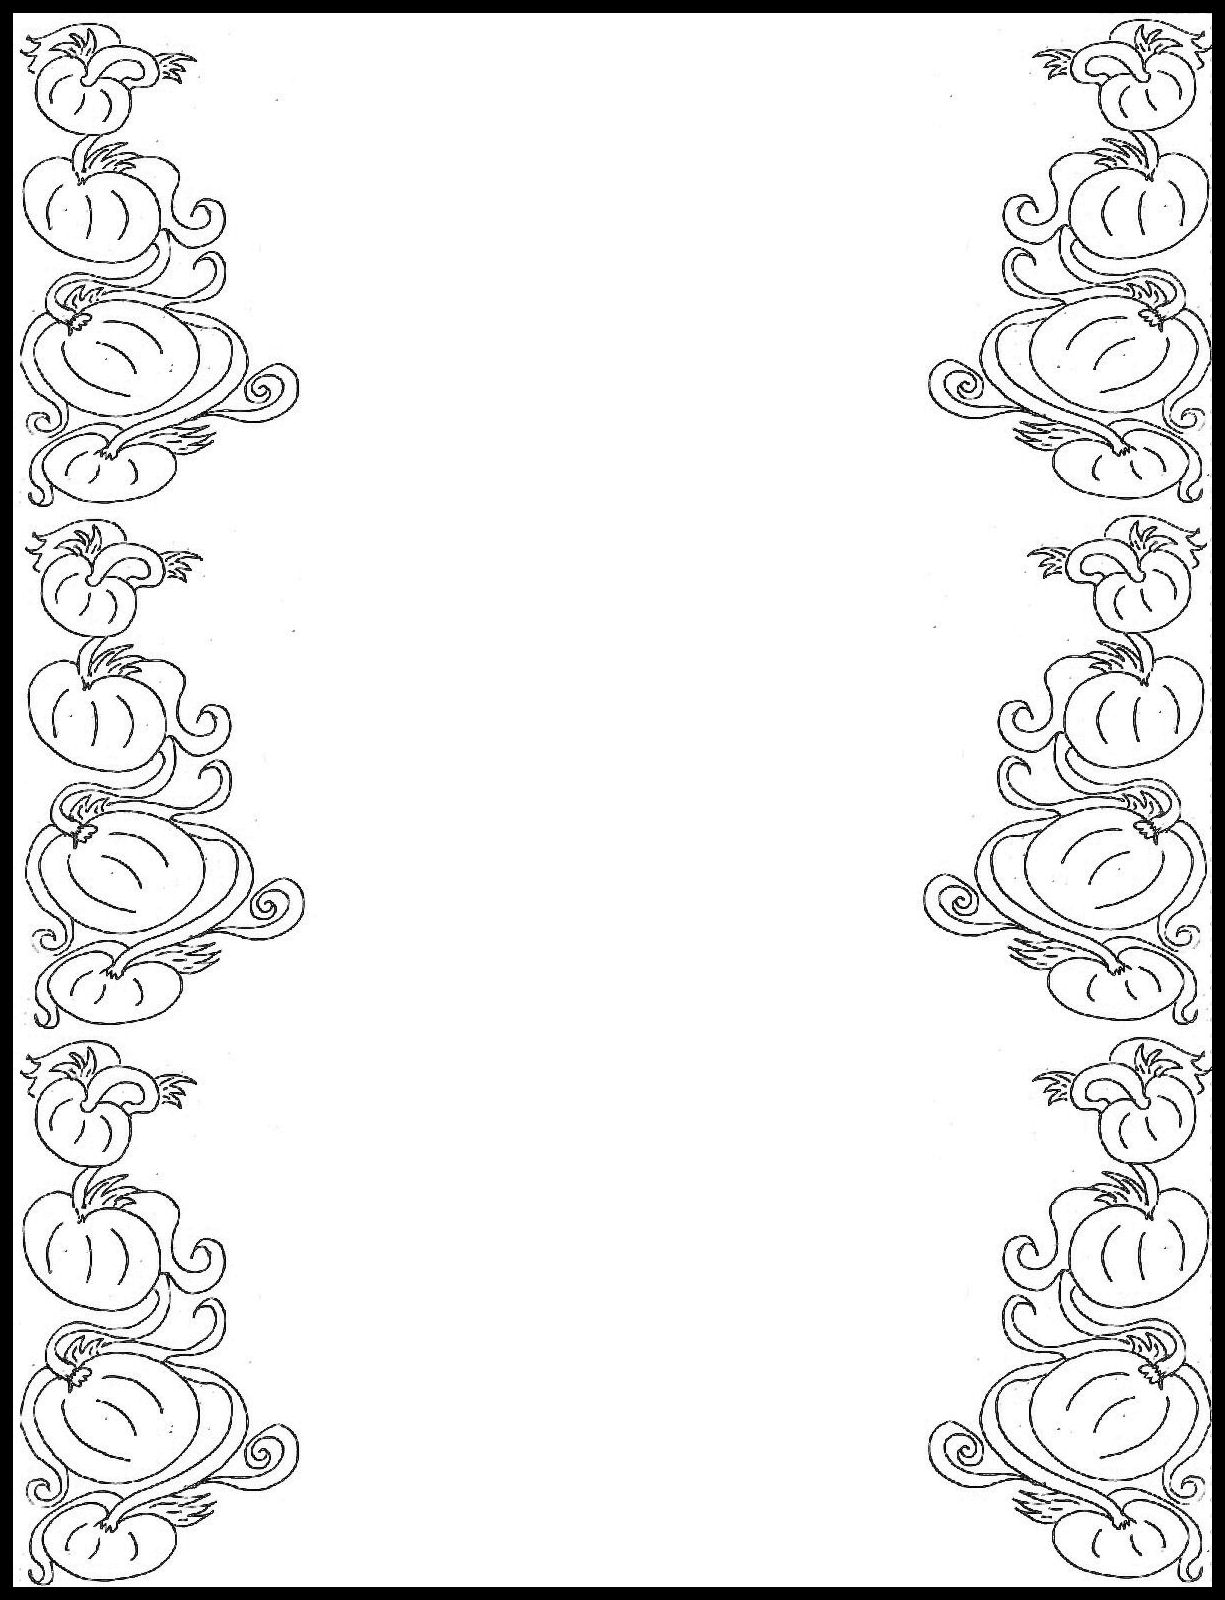 Free Printable Paper Border Designs Christian - Clipart library